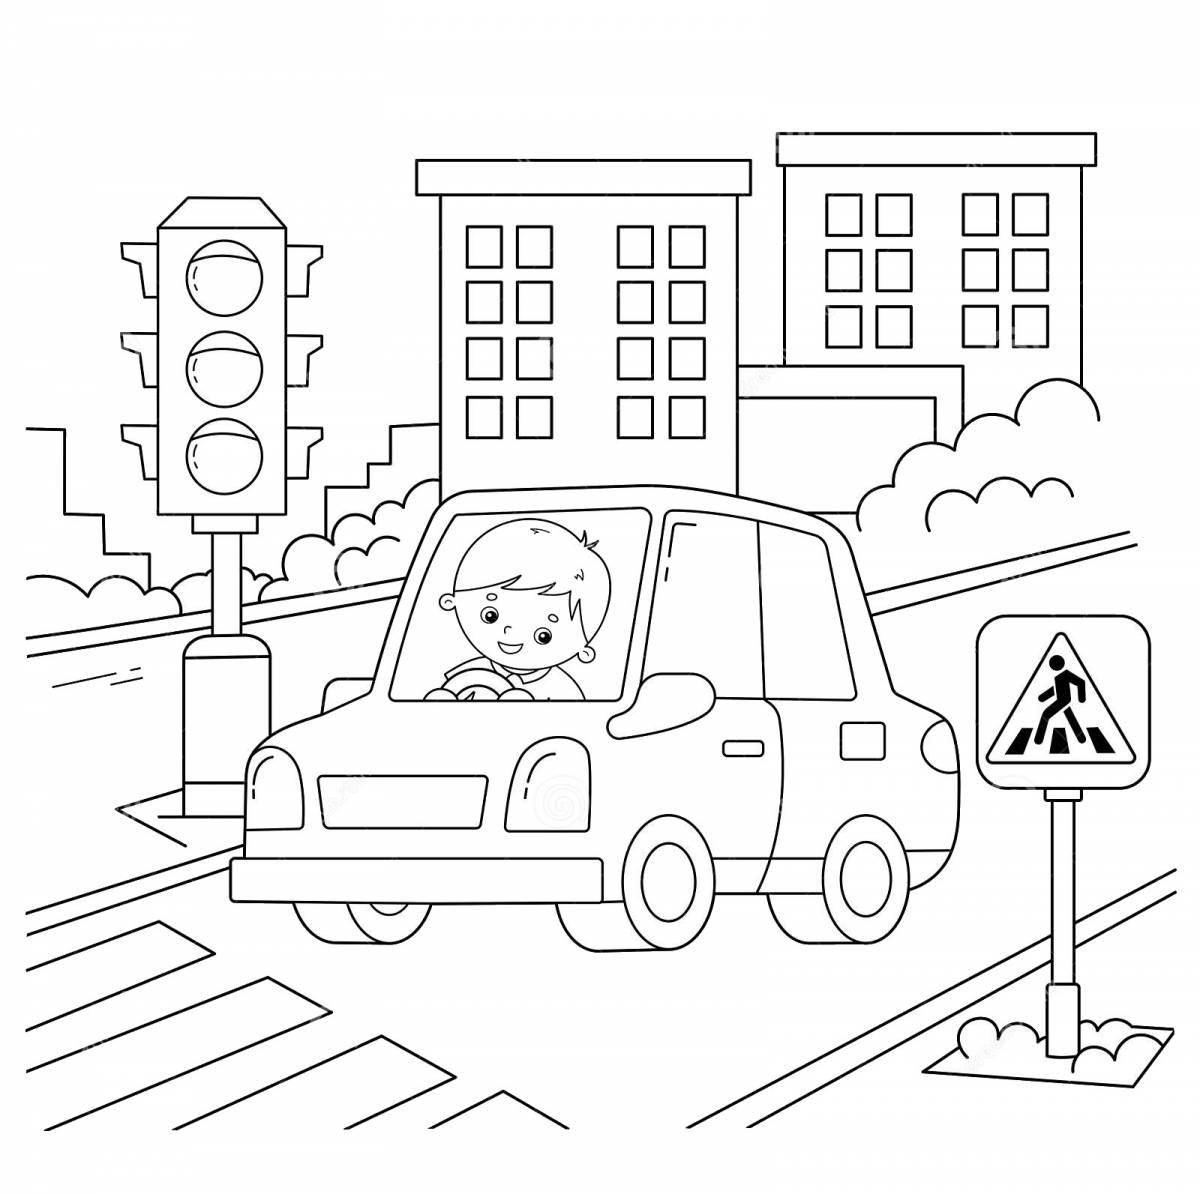 A tempting traffic safety page for the little ones